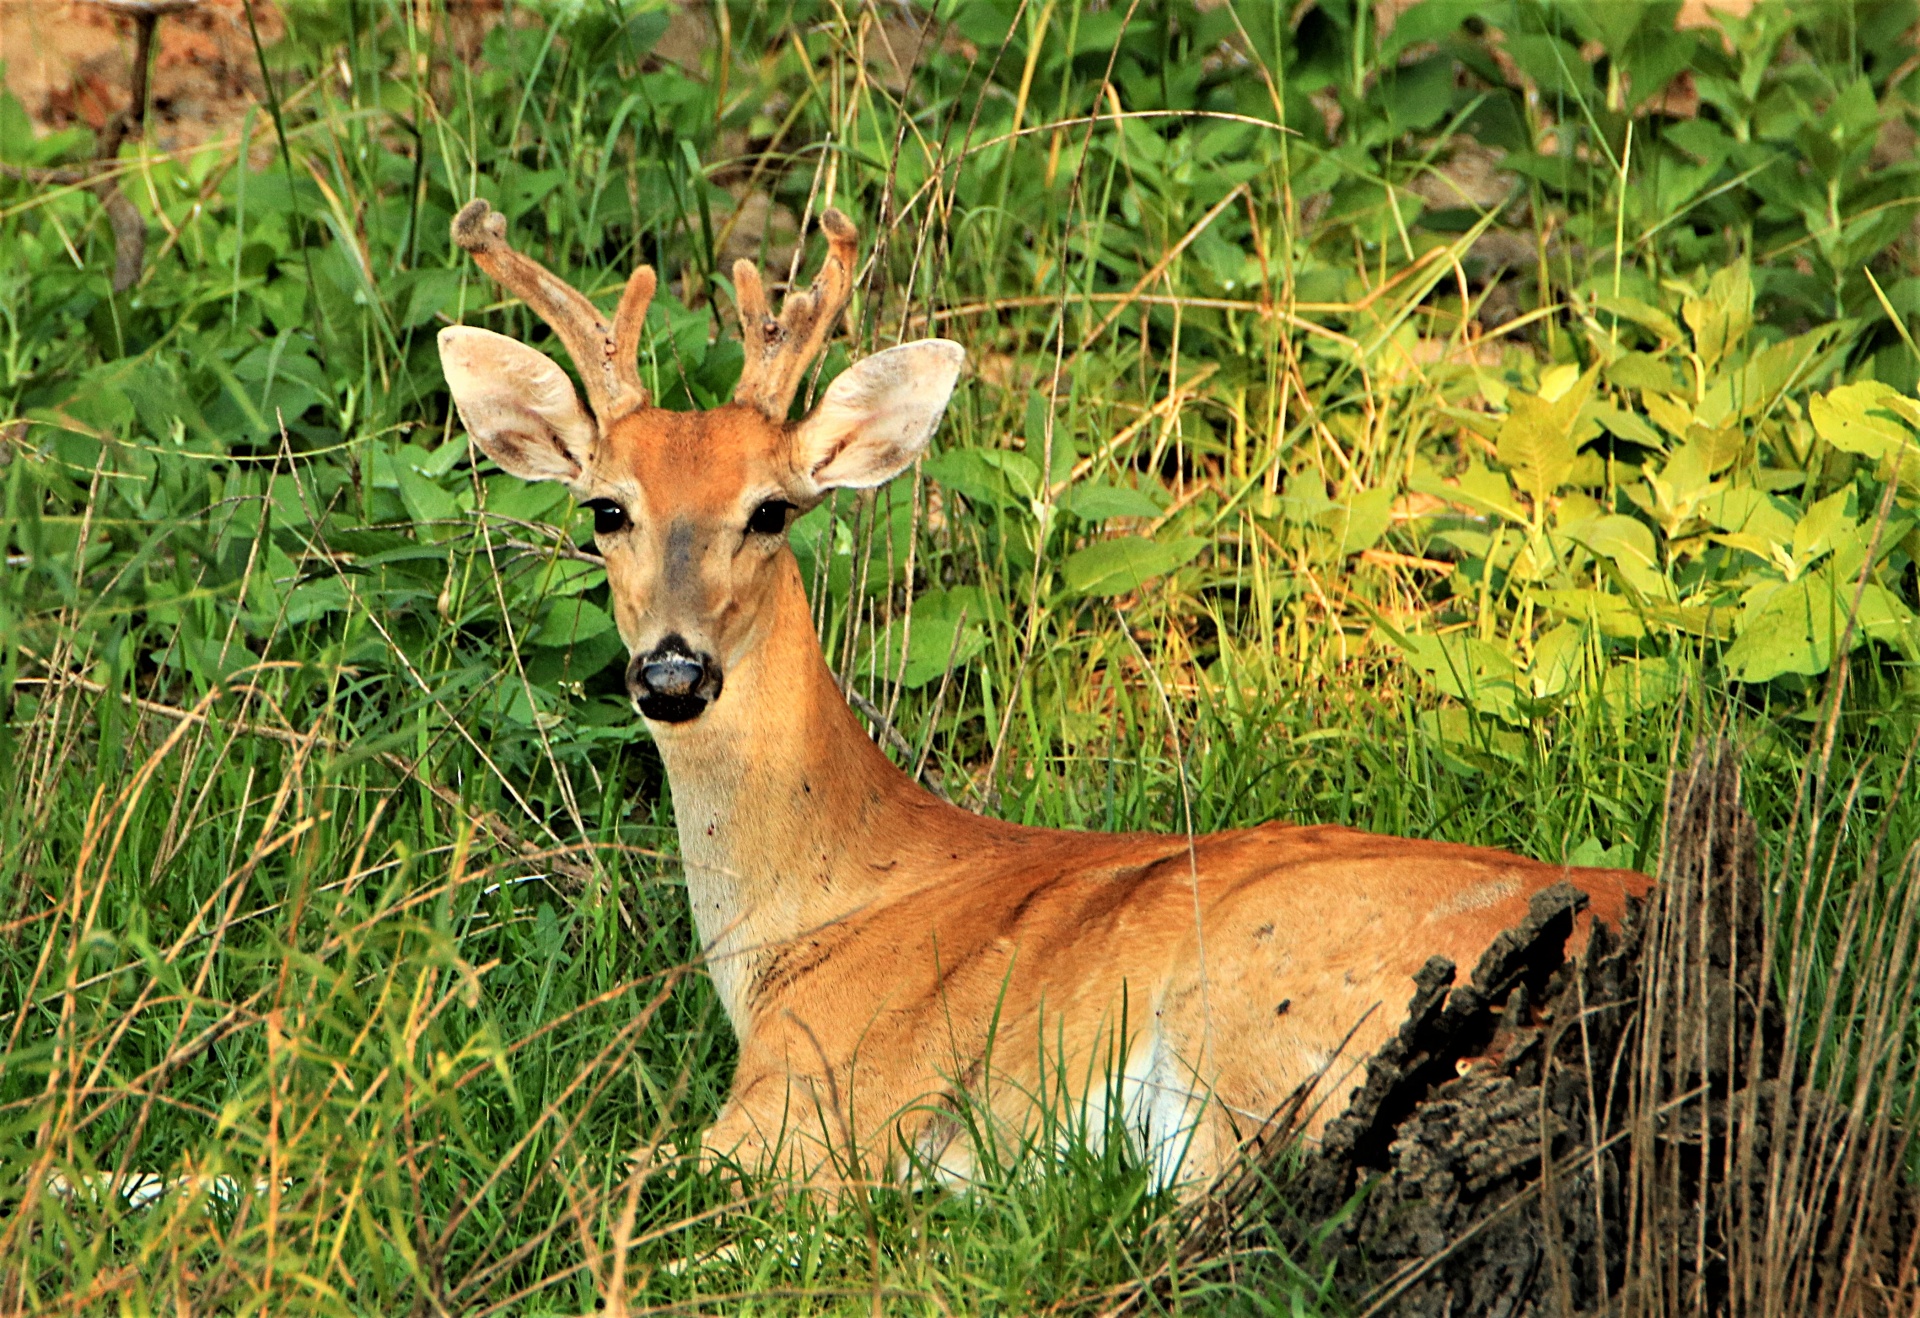 Close-up of a white-tail buck deer resting among tall green grass and bushes on a late summer day.